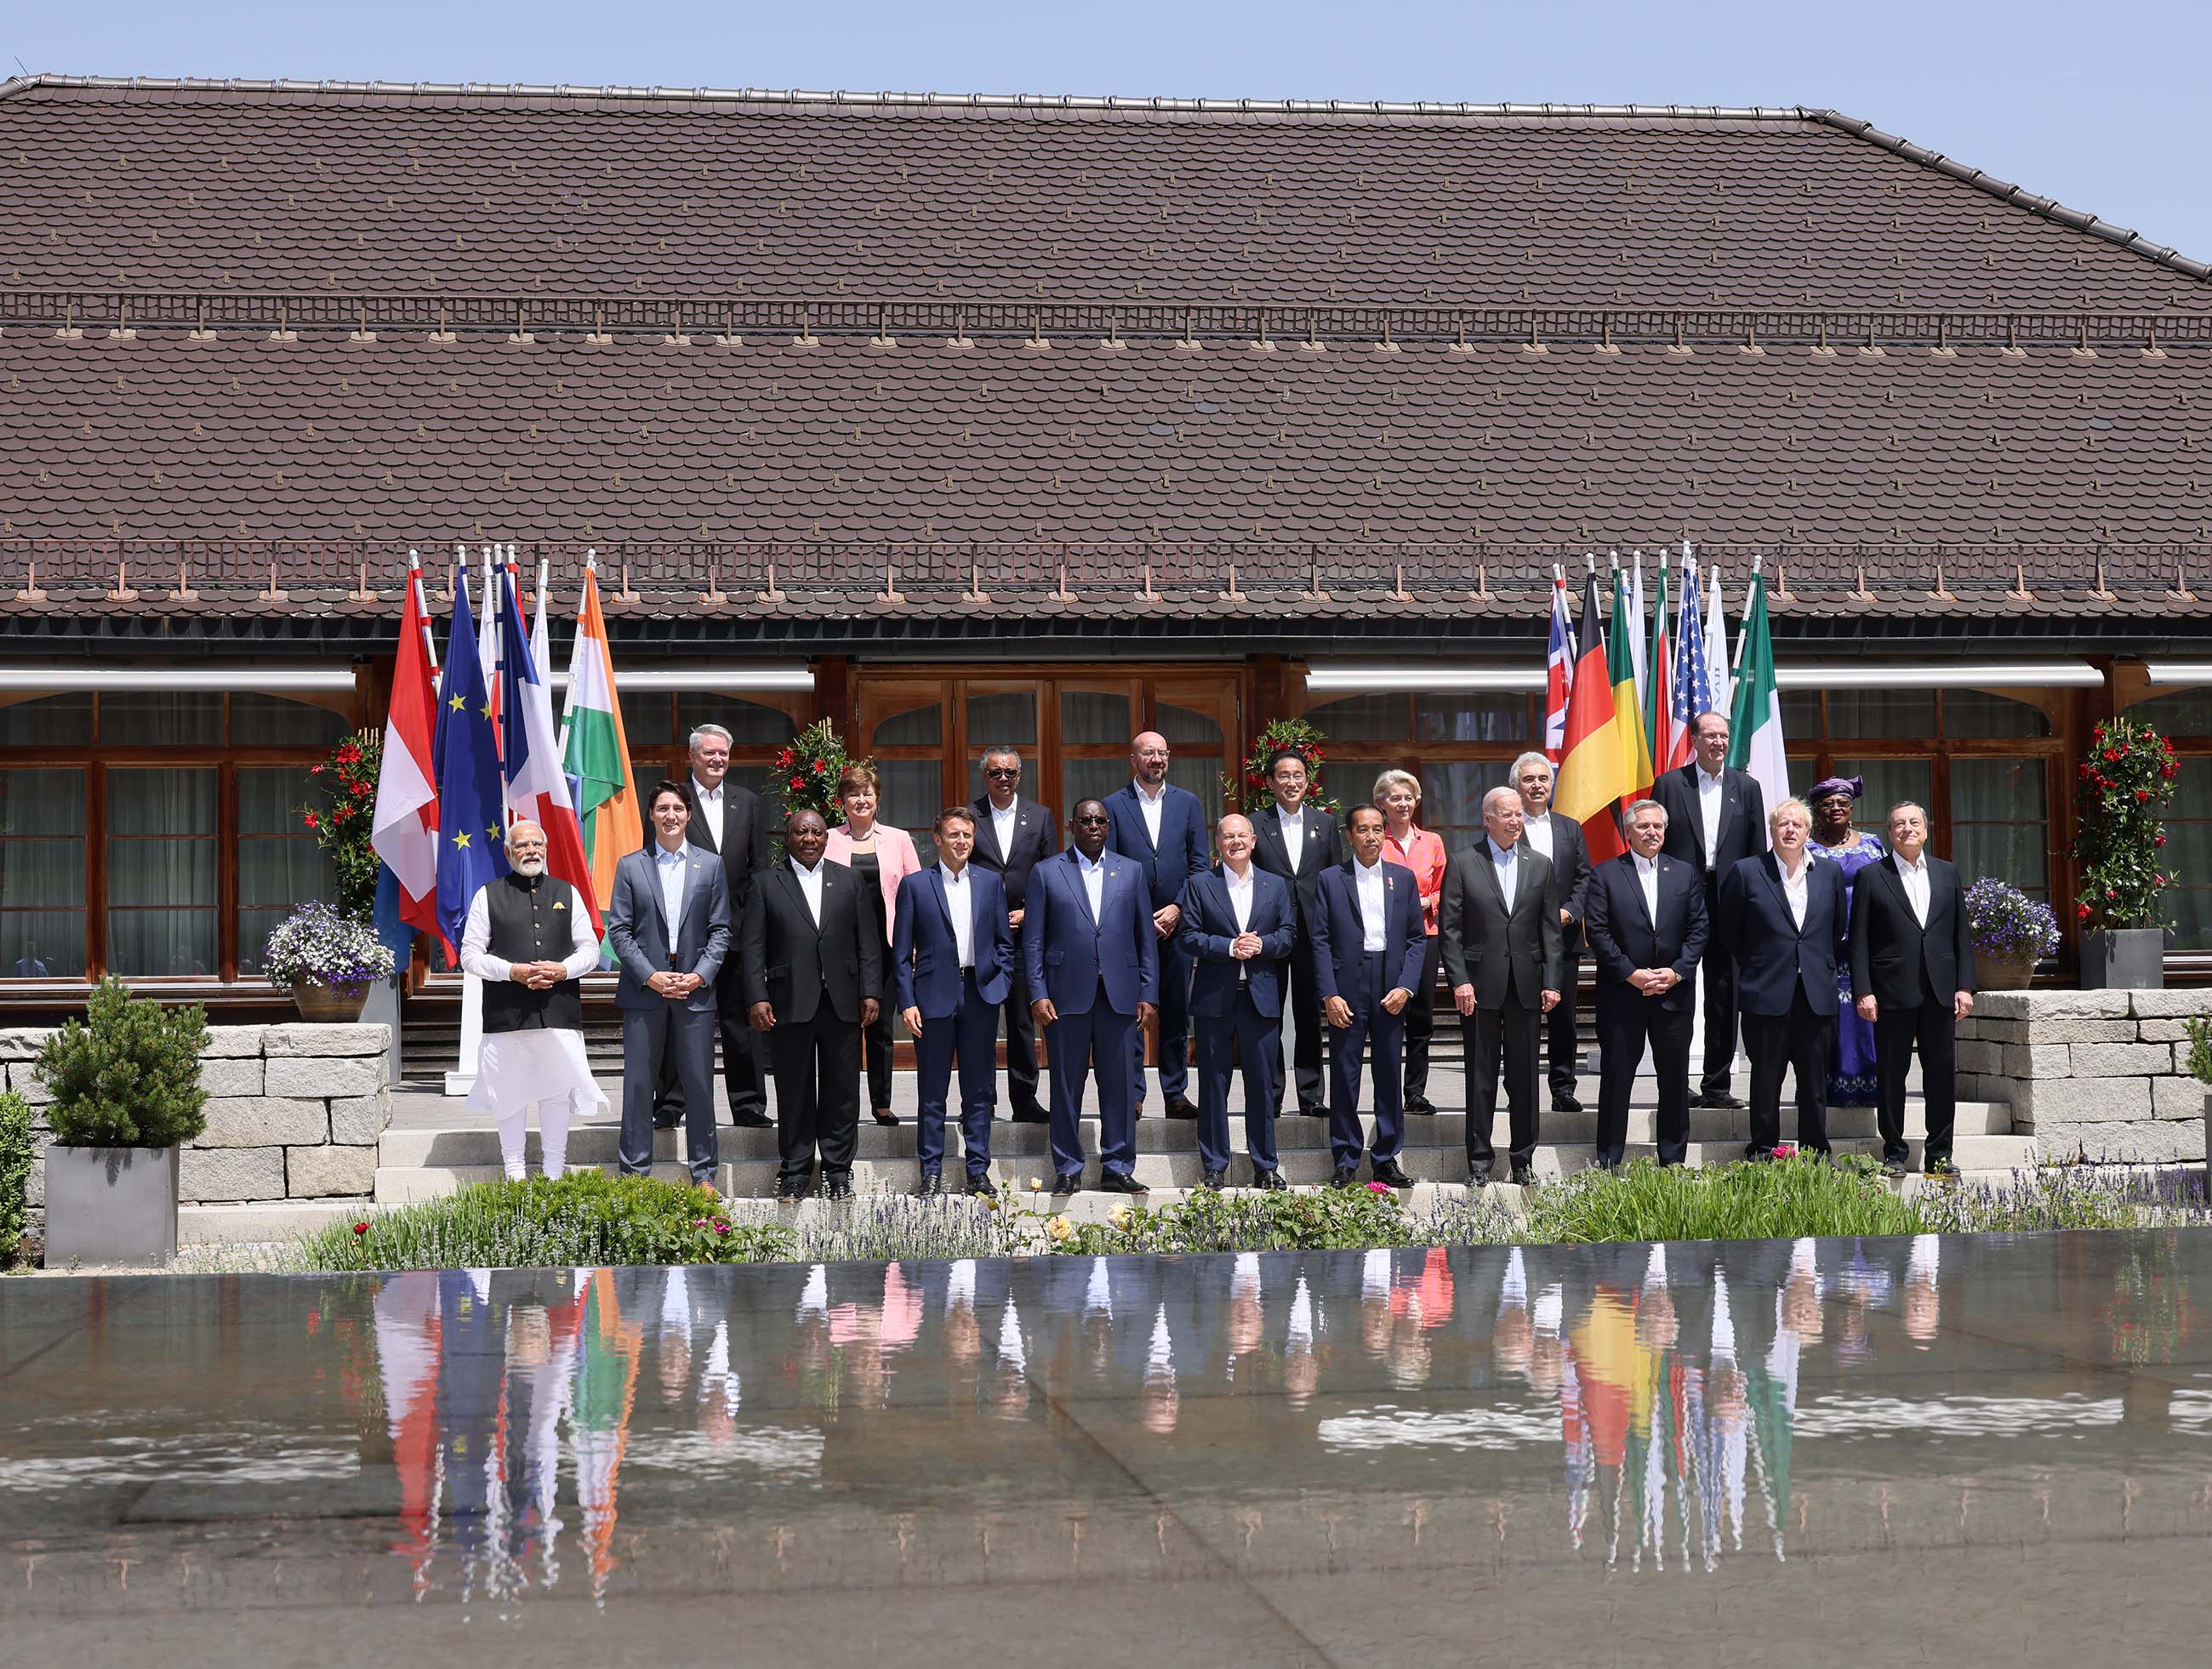 Photograph of a group photo session with the leaders of the G7 members and guest countries (3)